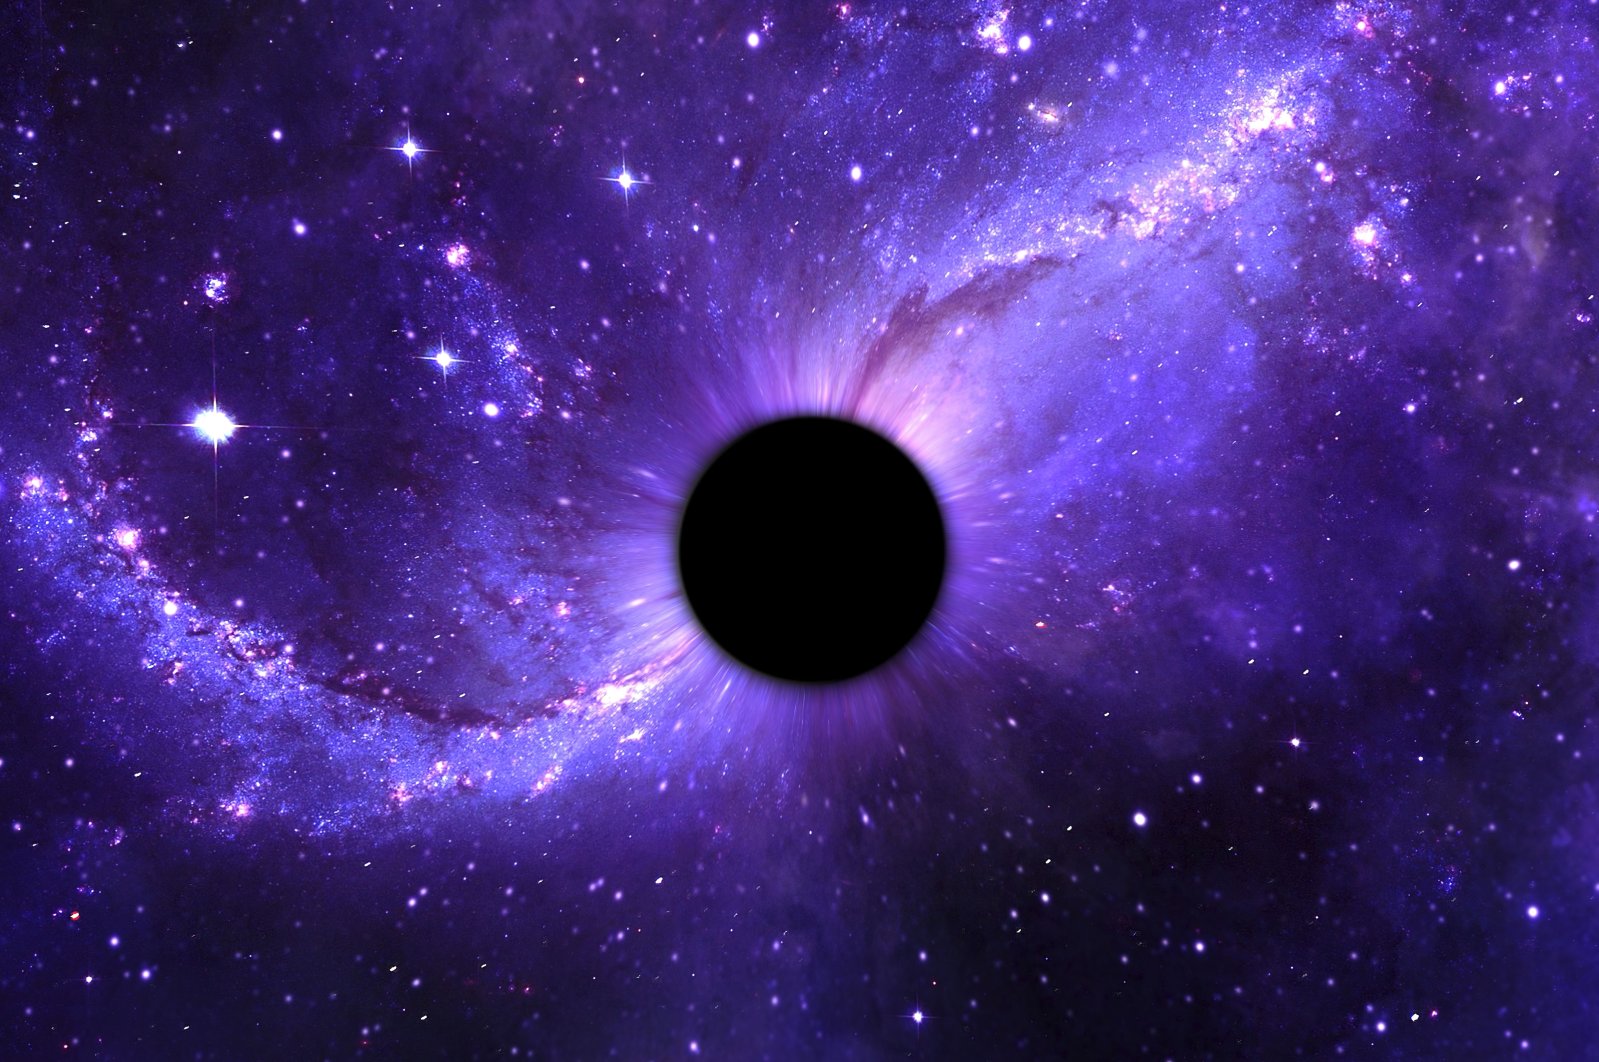 A blackhole surrounded by stars in space. (Shutterstock Photo)